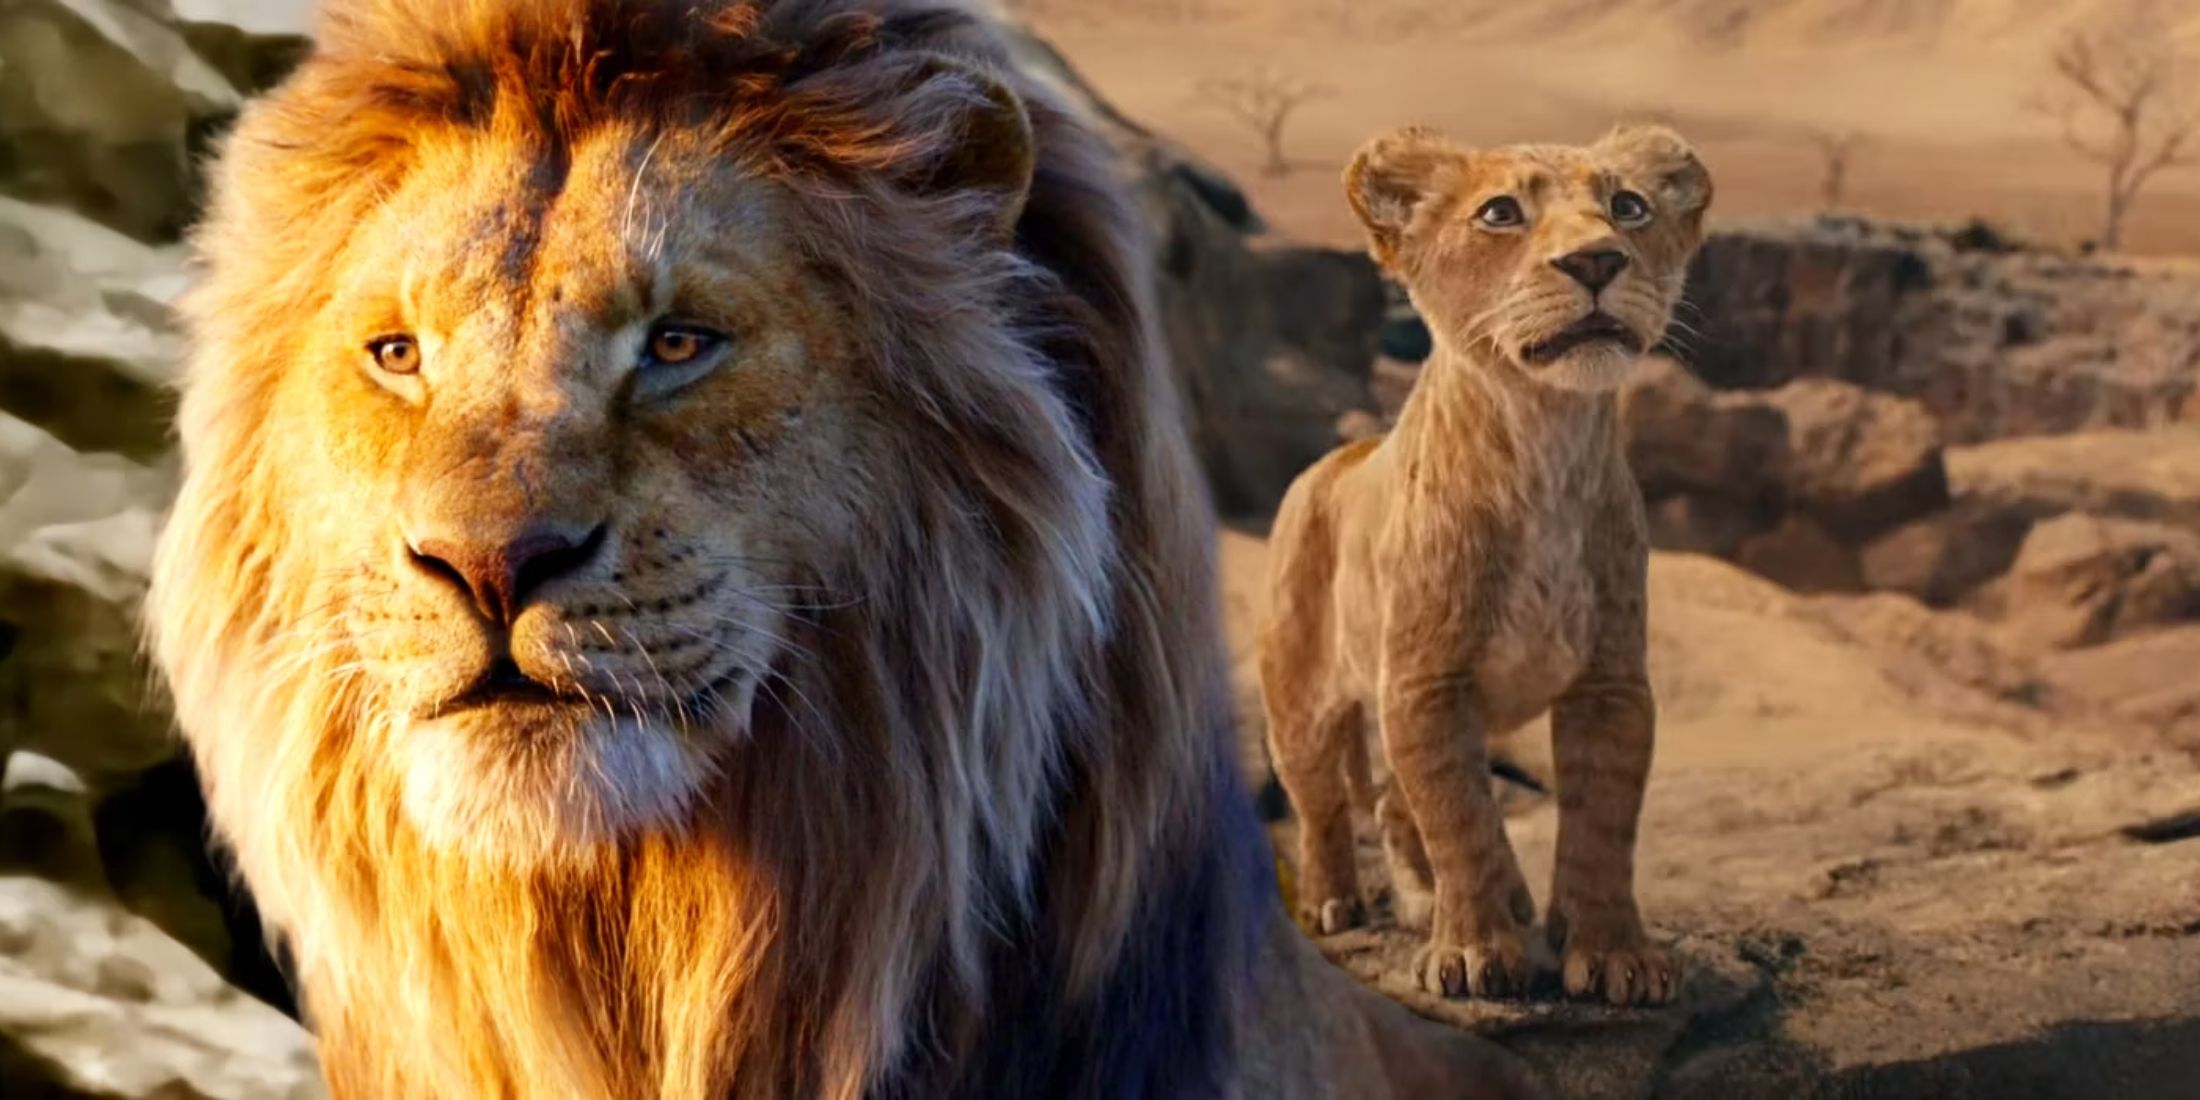 One Part Of Mufasa’s Story Debunks The Biggest Criticism Of The Lion King Prequel